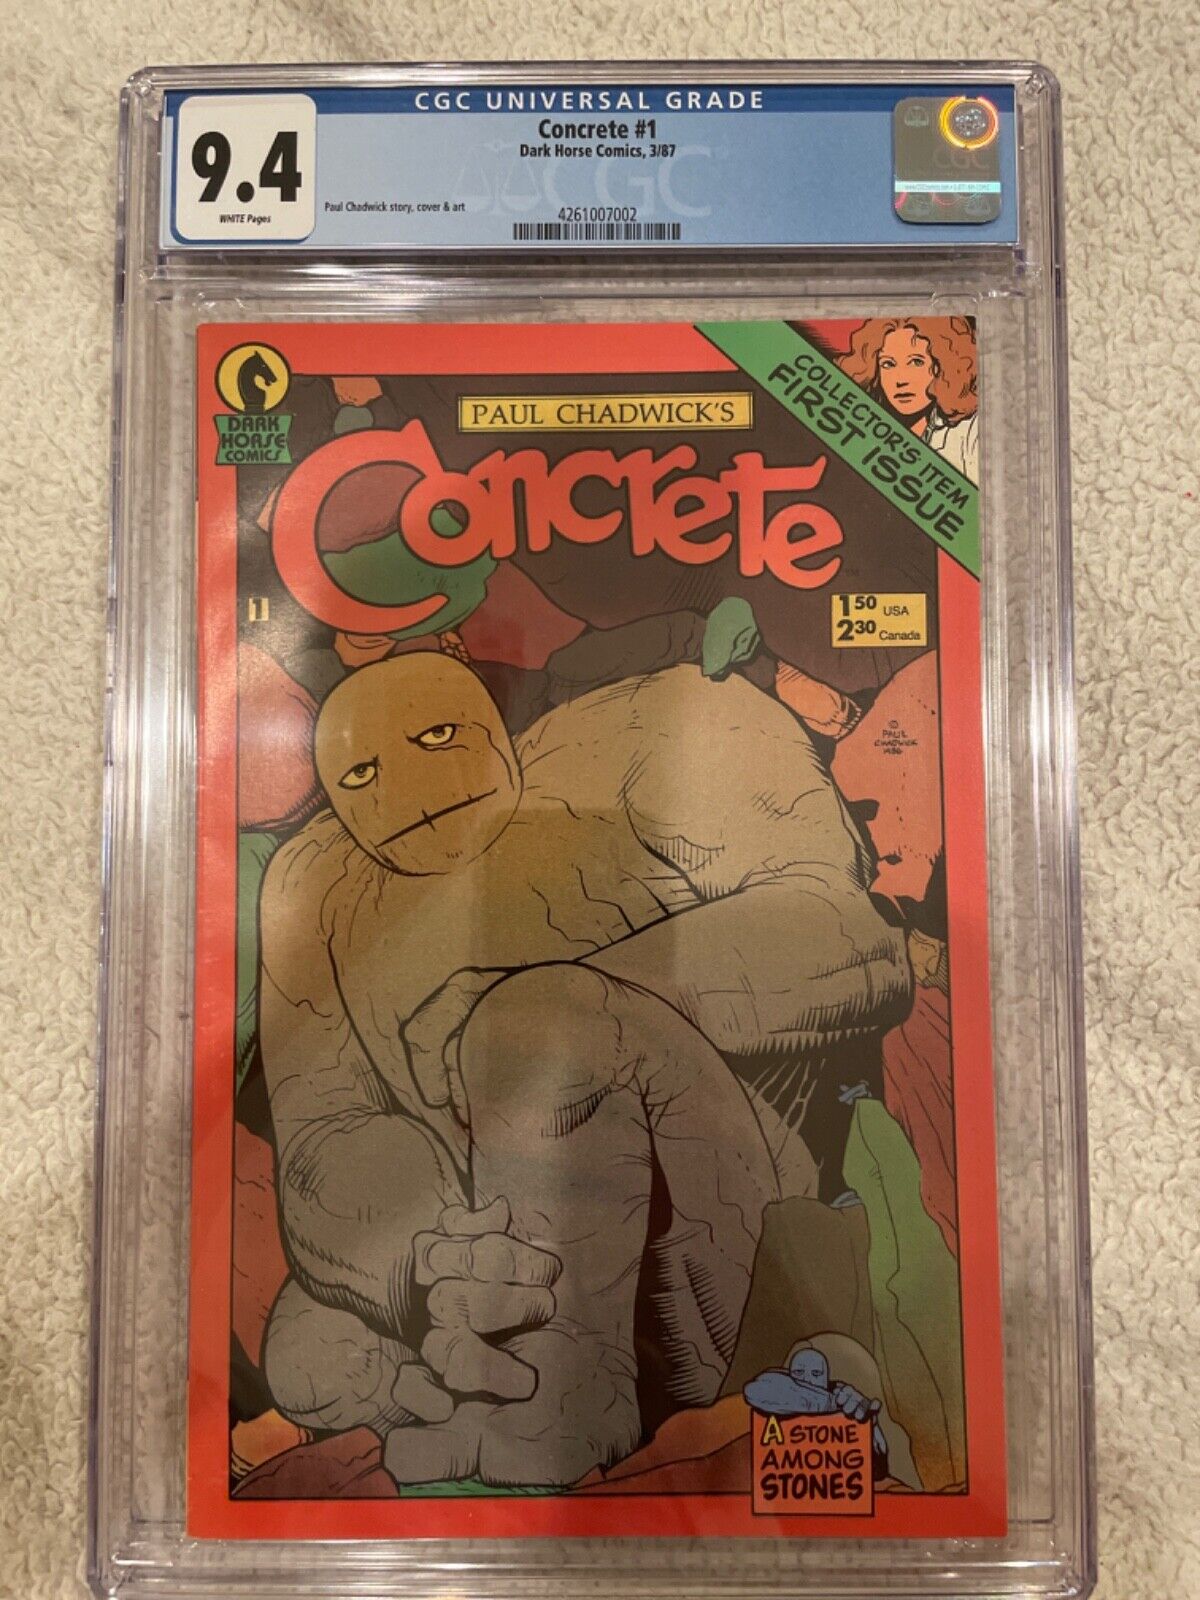 Concrete #1 CGC 9.4 white pages (1987) -difficult to find in high grade.